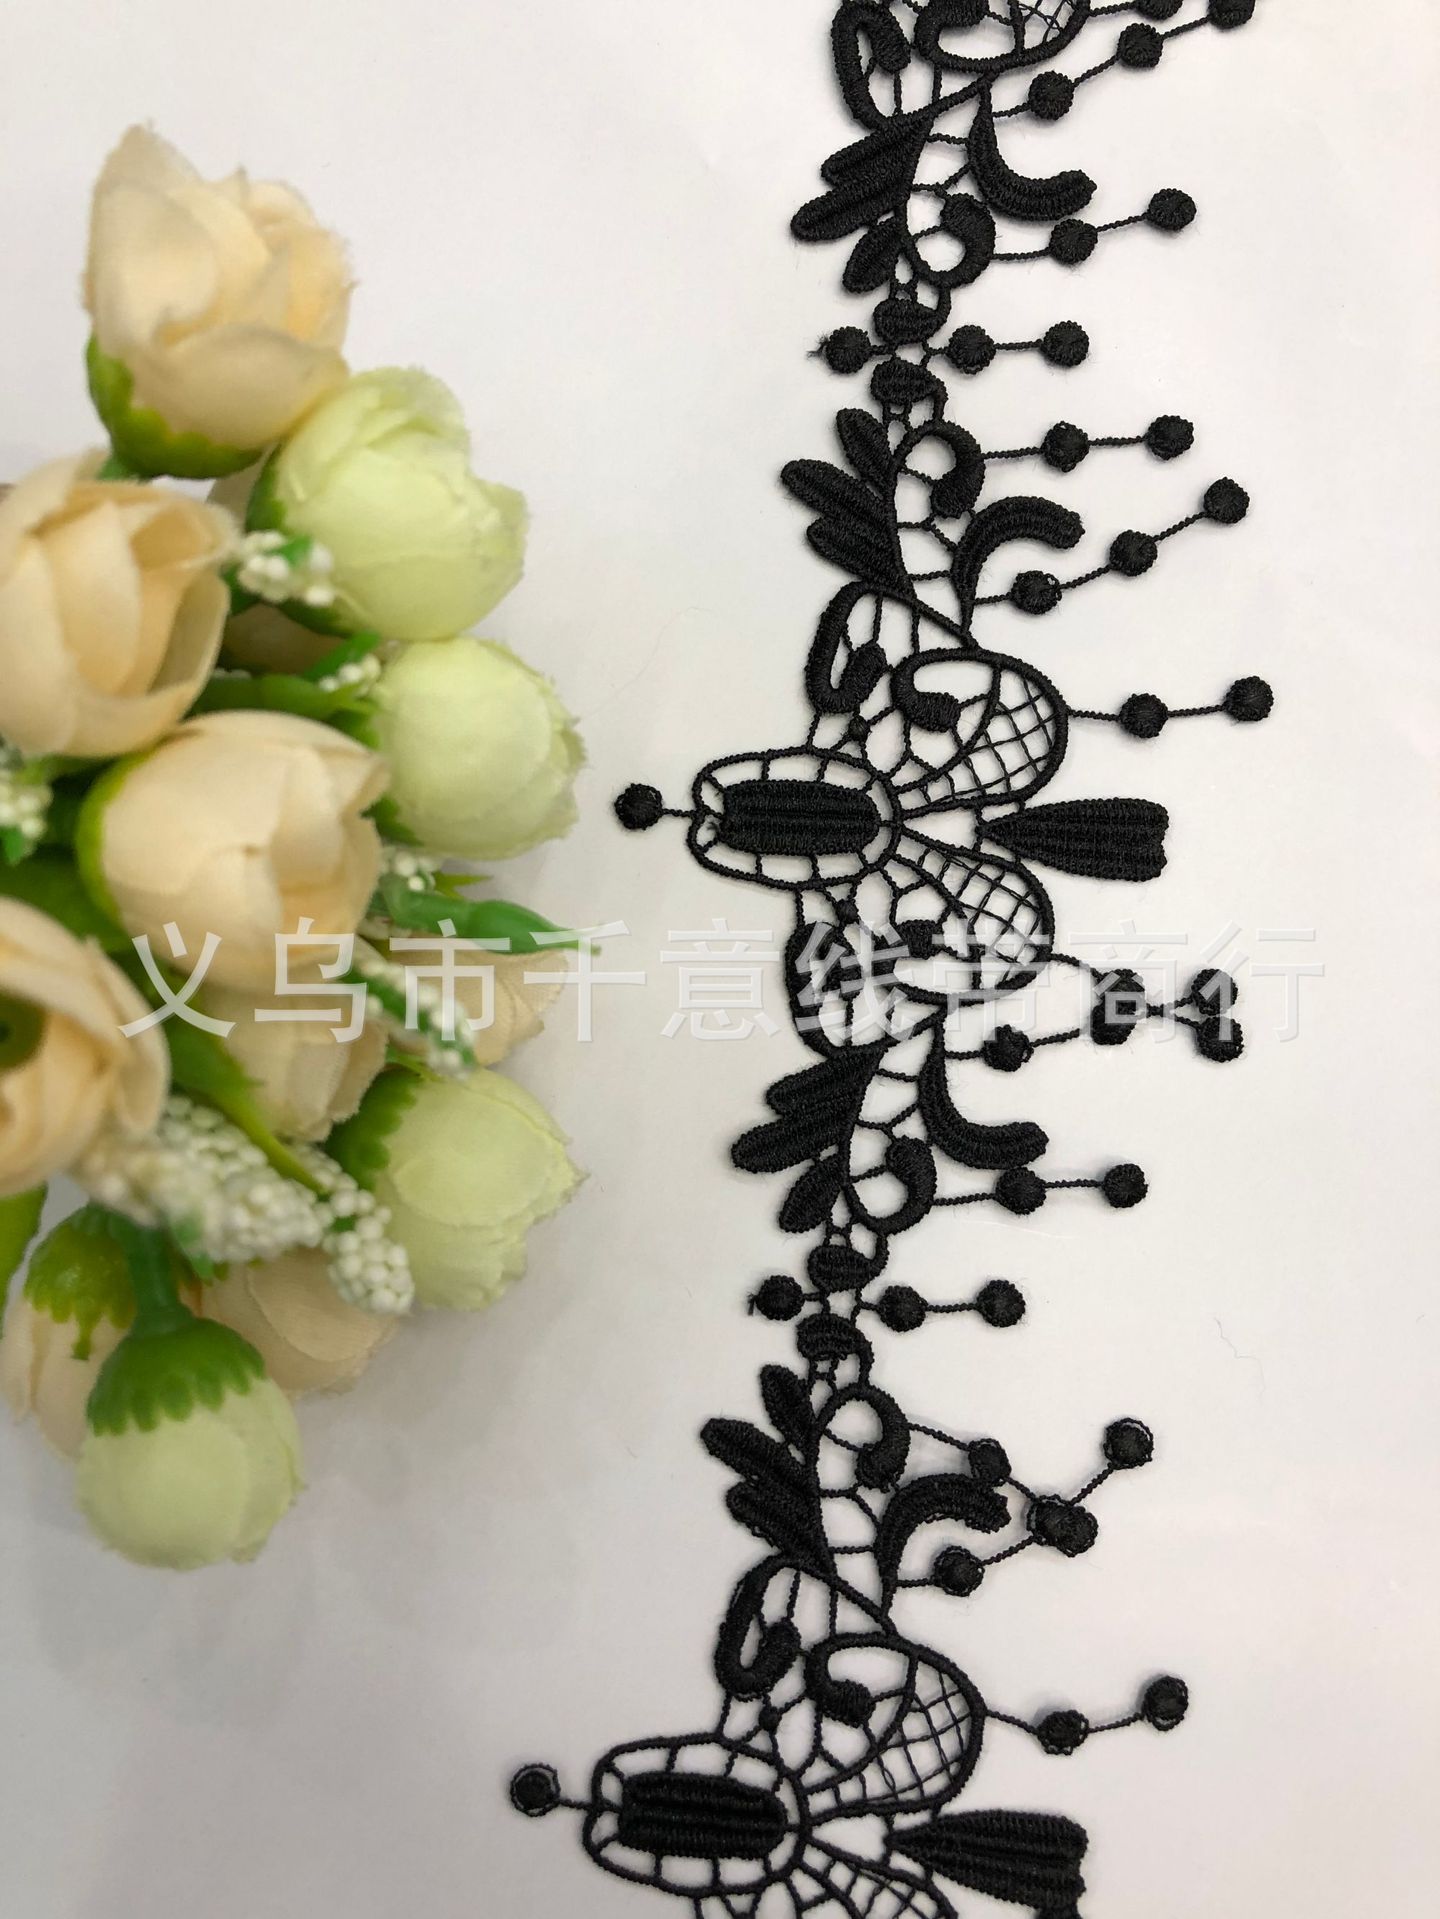 In Stock Water Soluble Flower Non-Flower Lace Embroidery Wedding Dress Skirt Scarf Dress DIY Lace Accessories